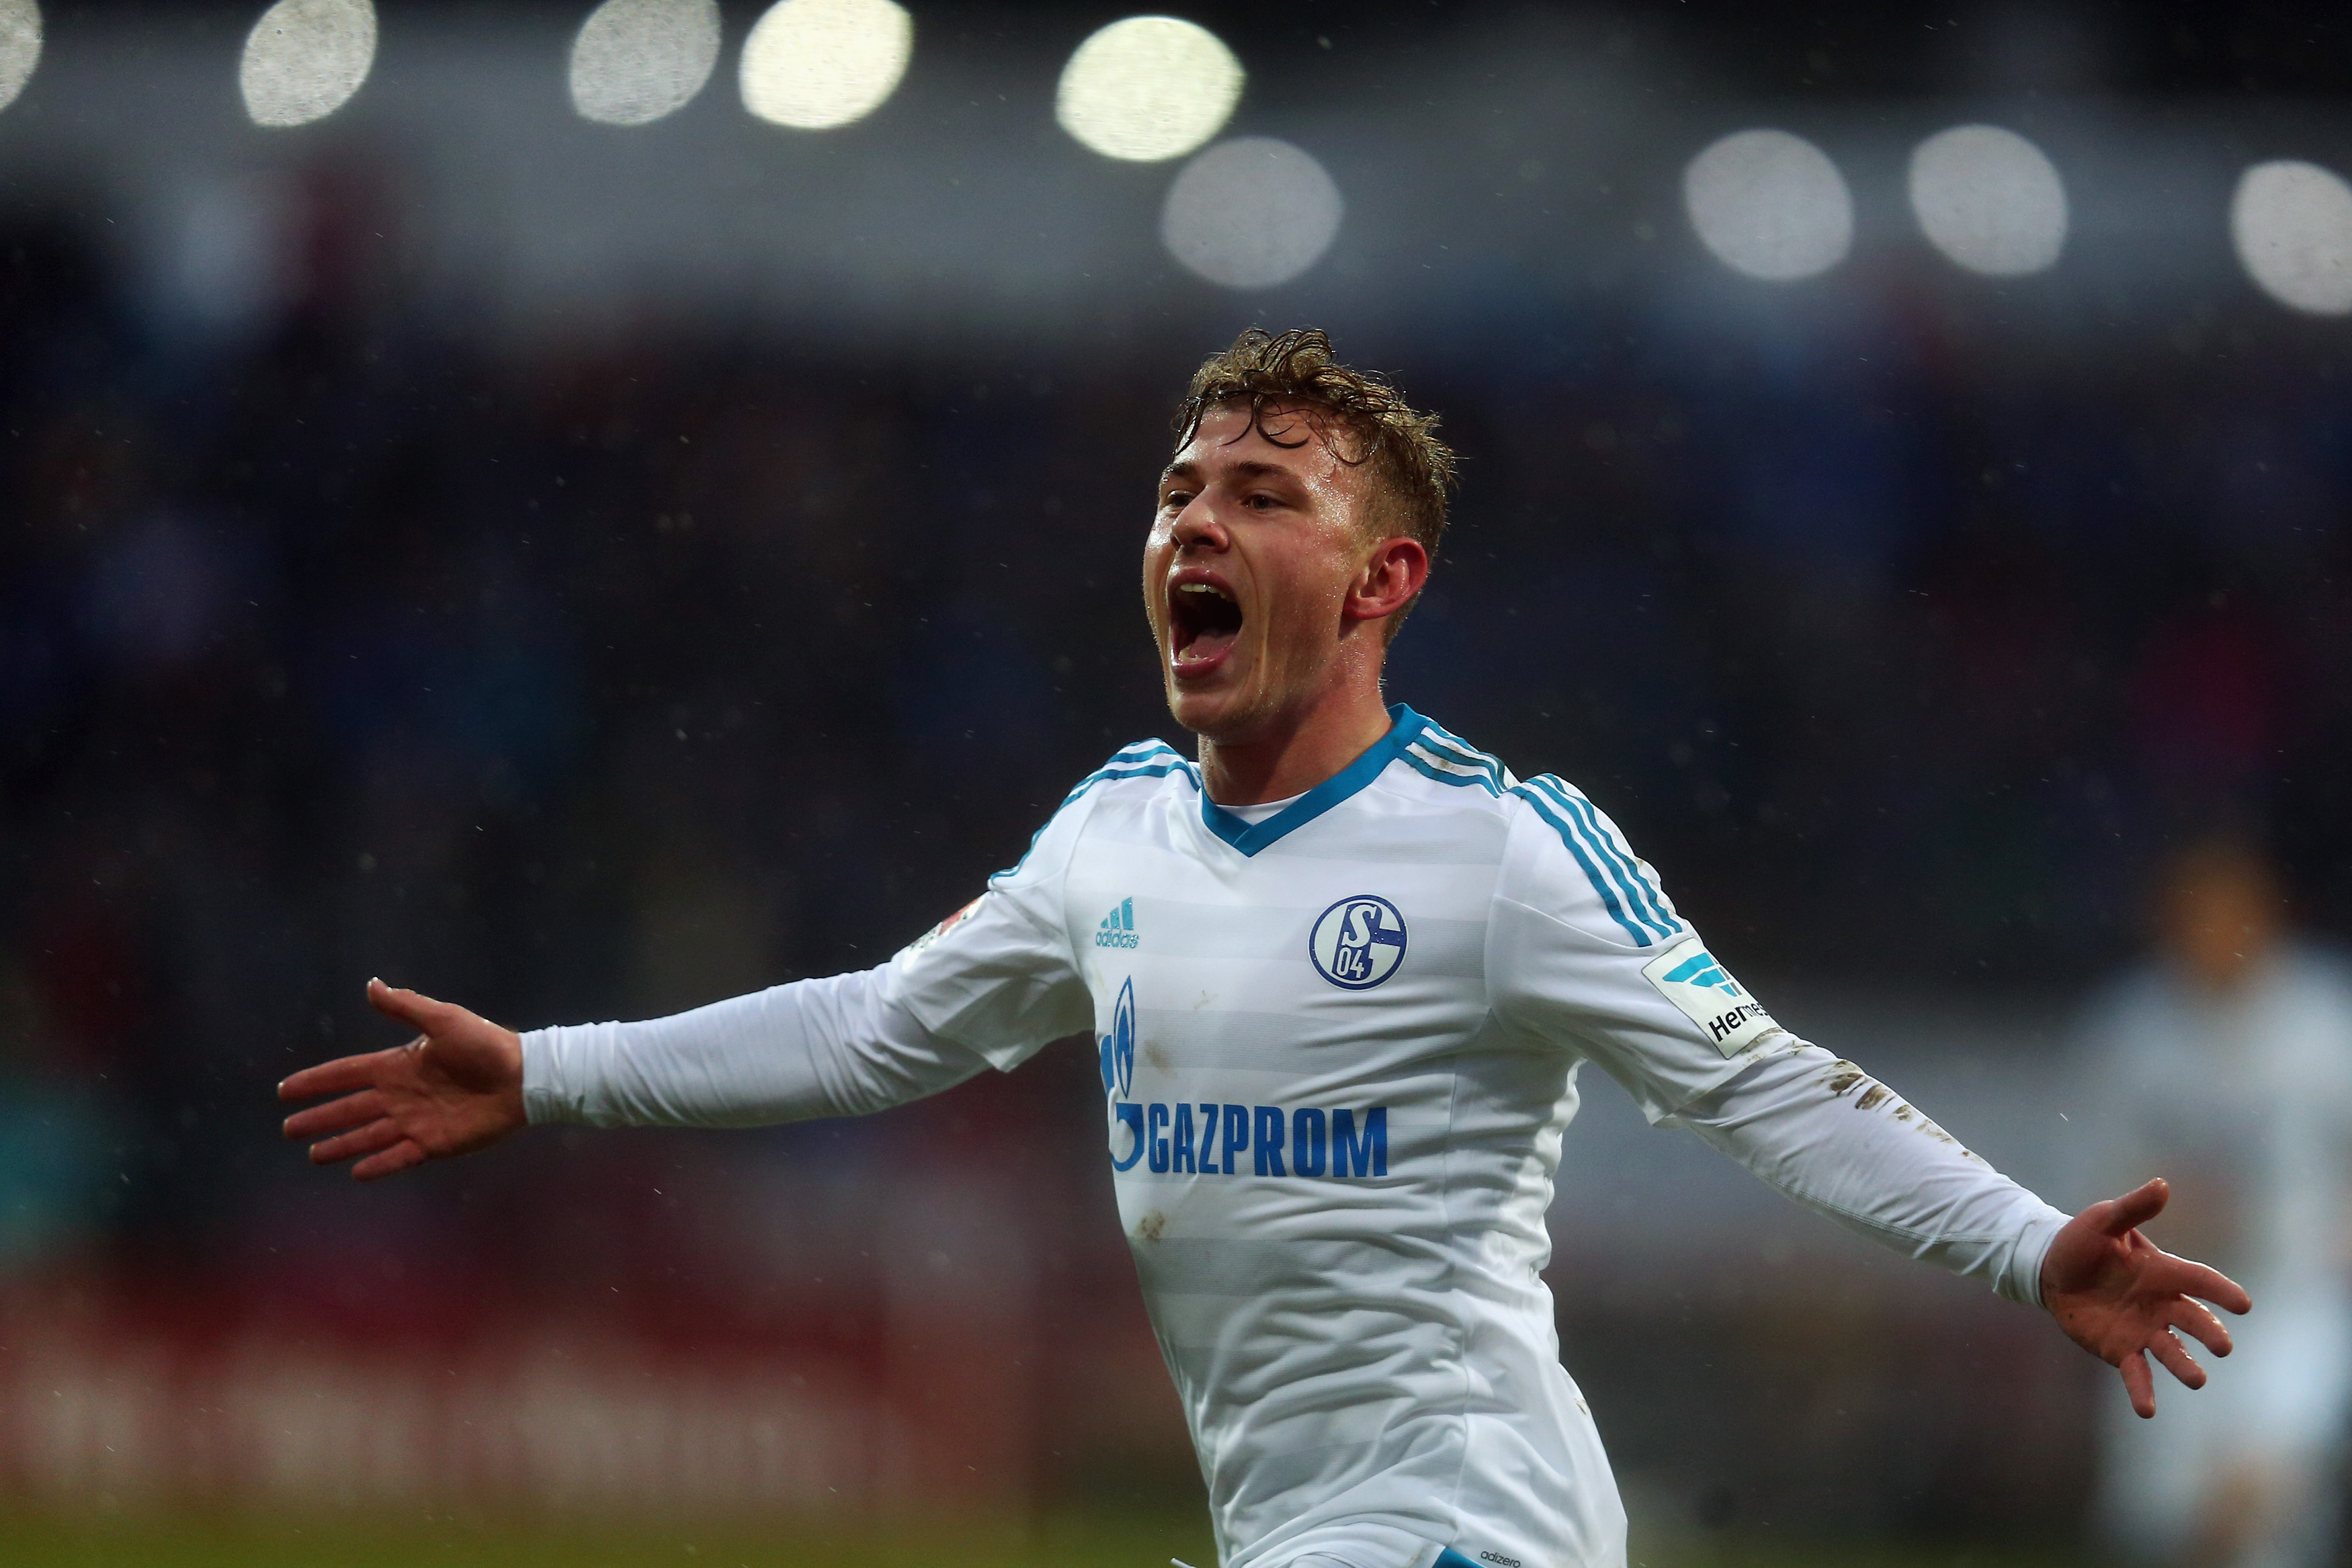 DARMSTADT, GERMANY - JANUARY 30: Max Meyer of Schalke celebrates his team's first goal during the Bundesliga match between SV Darmstadt 98 and FC Schalke 04 at Merck-Stadion am Boellenfalltor on January 30, 2016 in Darmstadt, Germany.  (Photo by Alex Grimm/Bongarts/Getty Images)